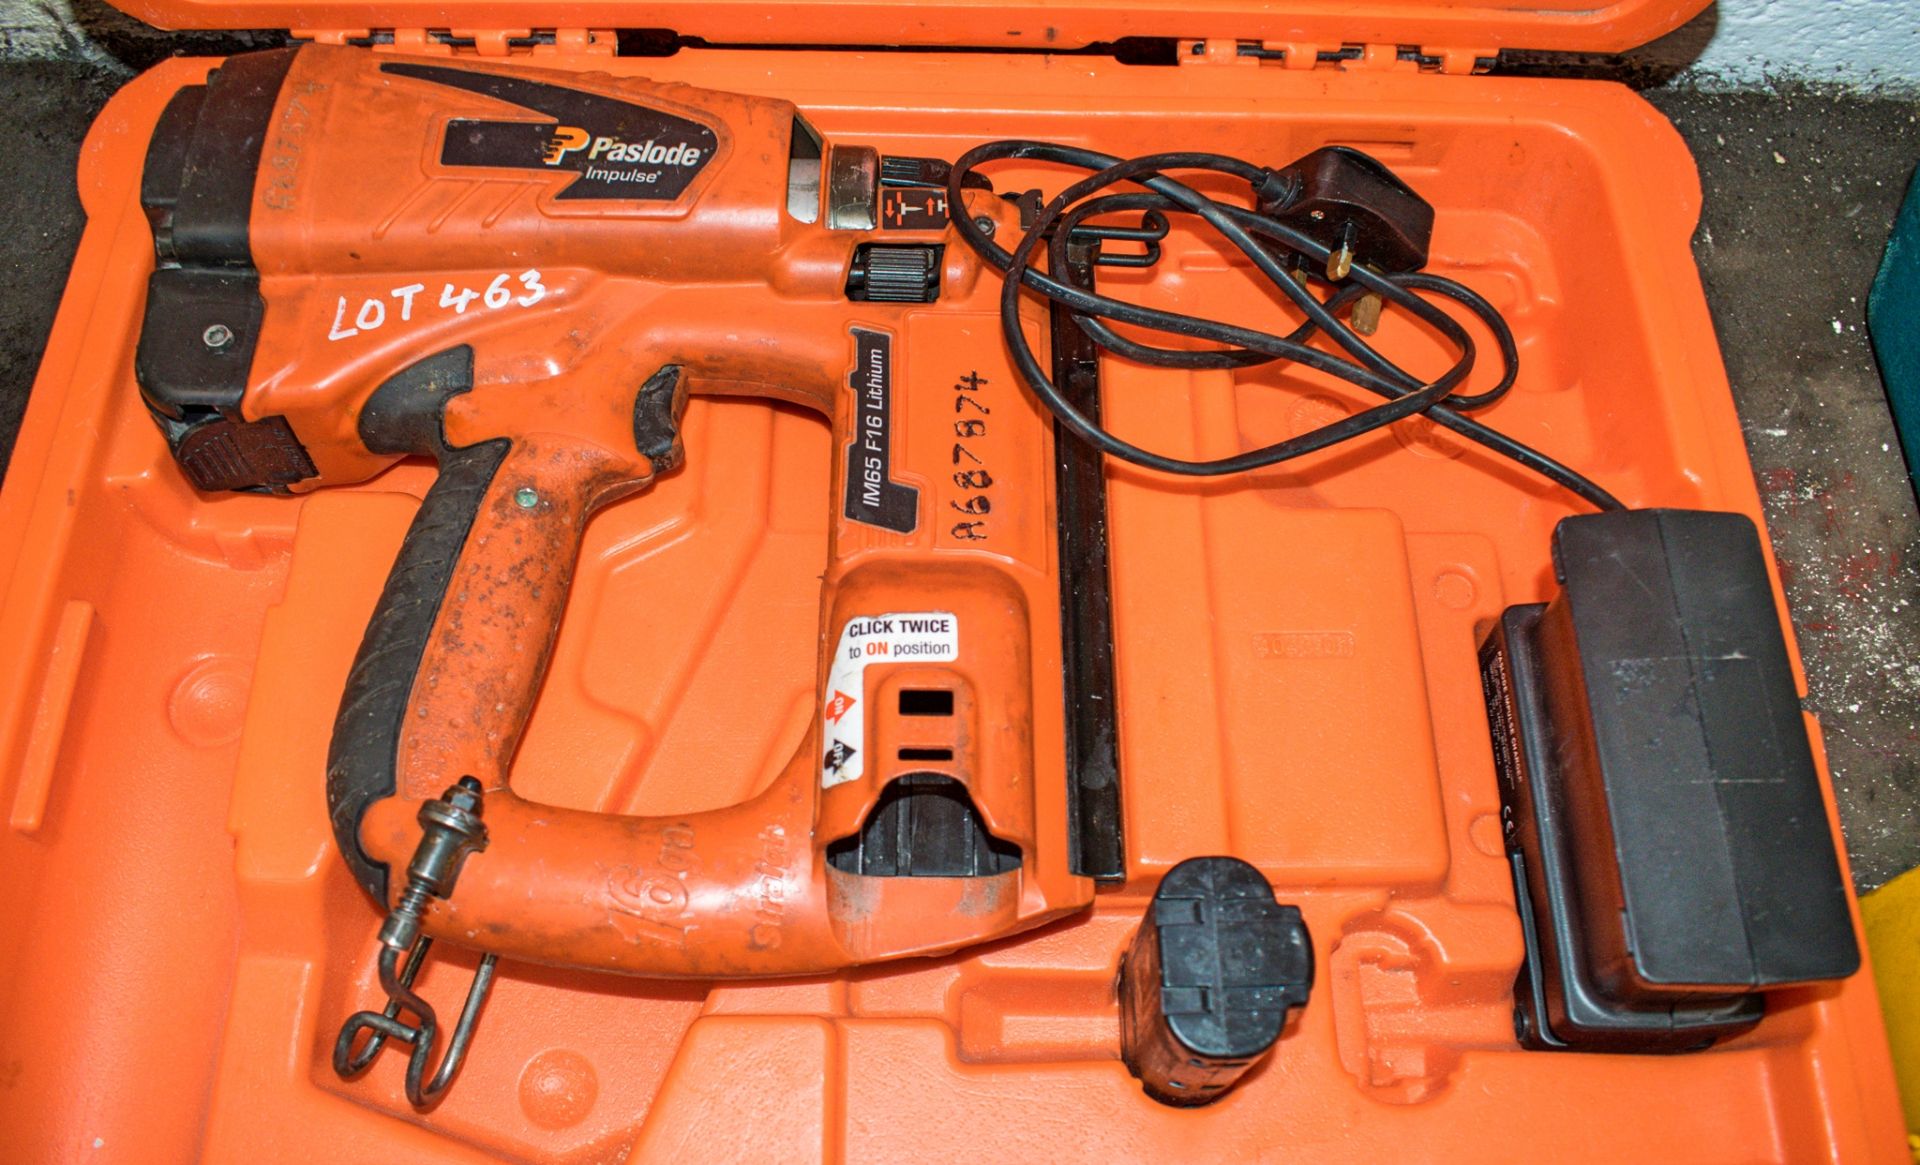 Paslode 7.2v nail gun c/w battery, charger & carry case A687874